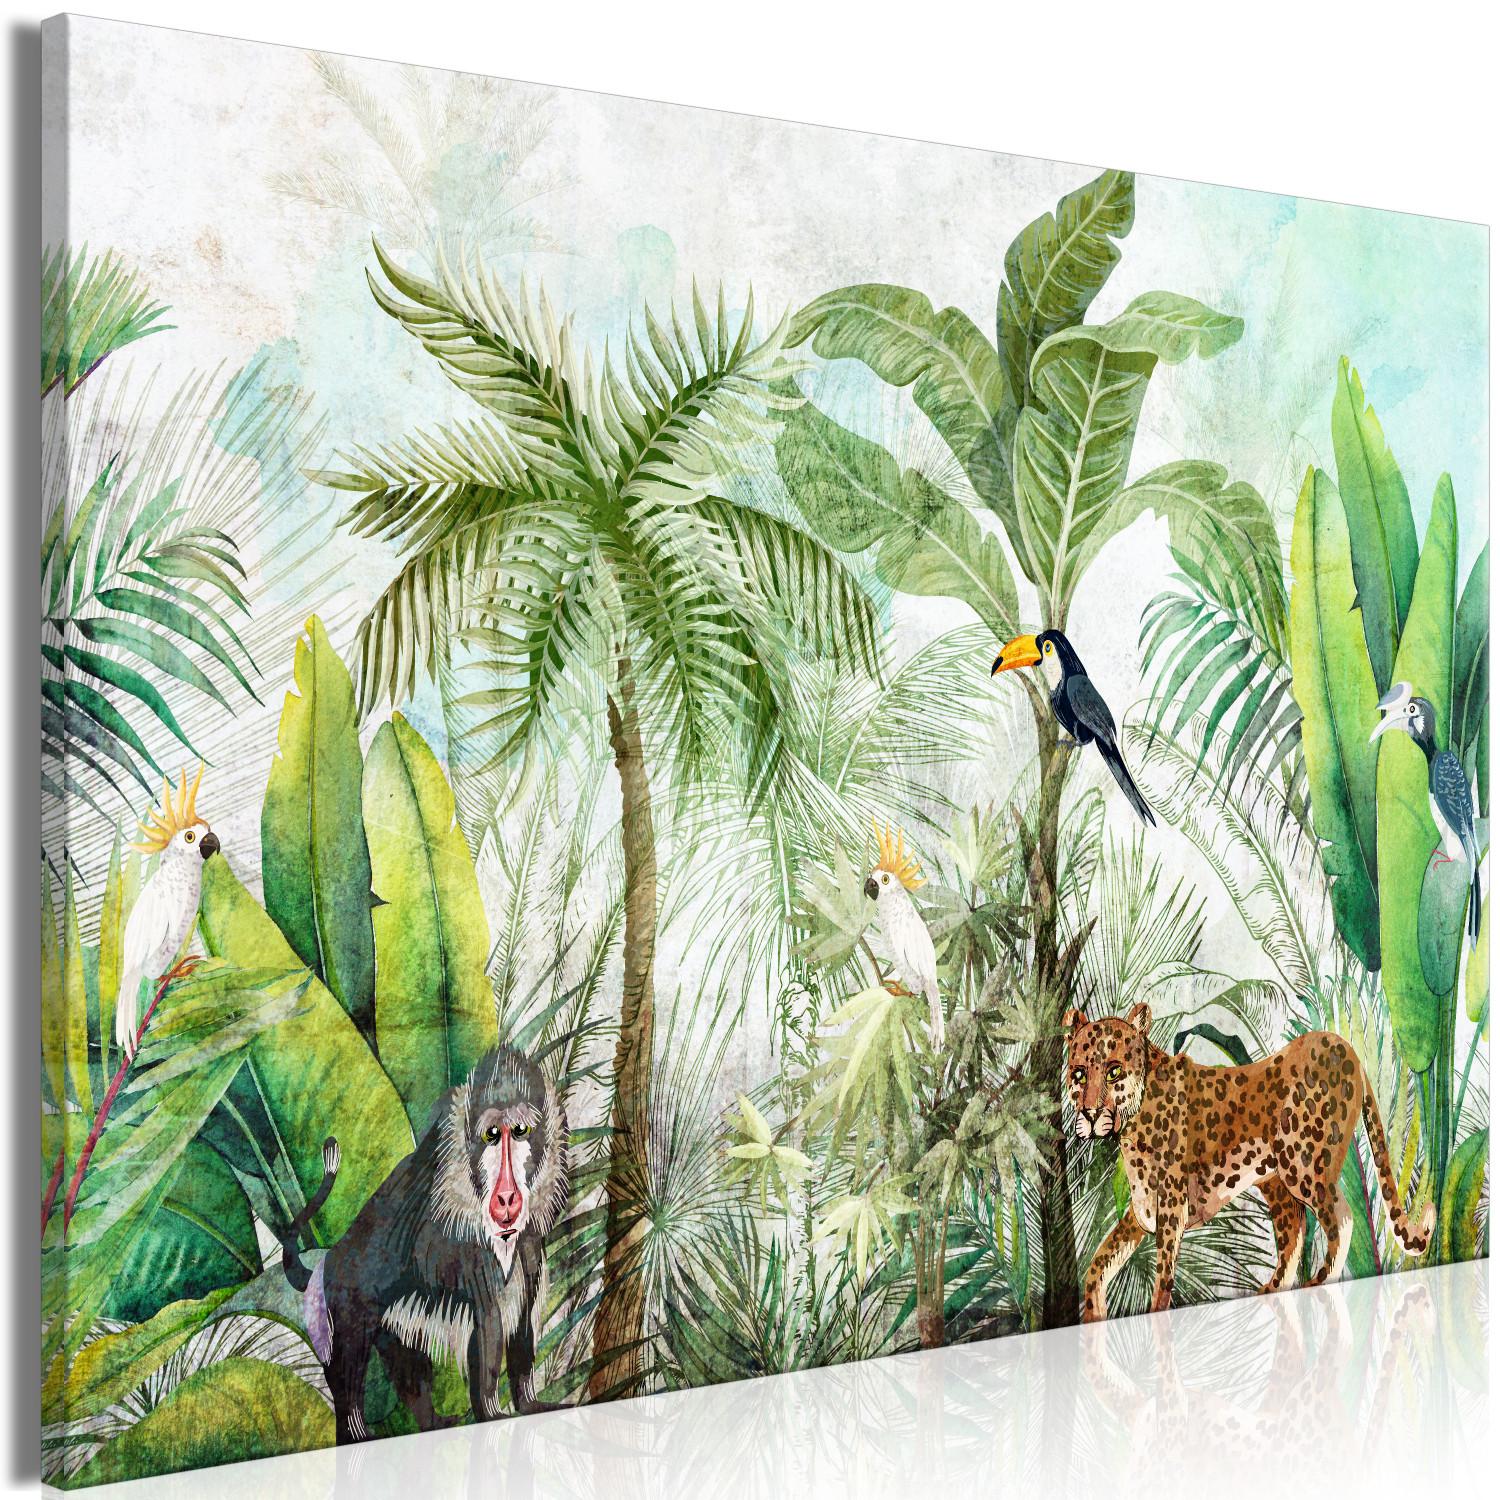 Cuadro decorativo Wilderness - Tall Palm Trees and Animals in a Tropical Jungle